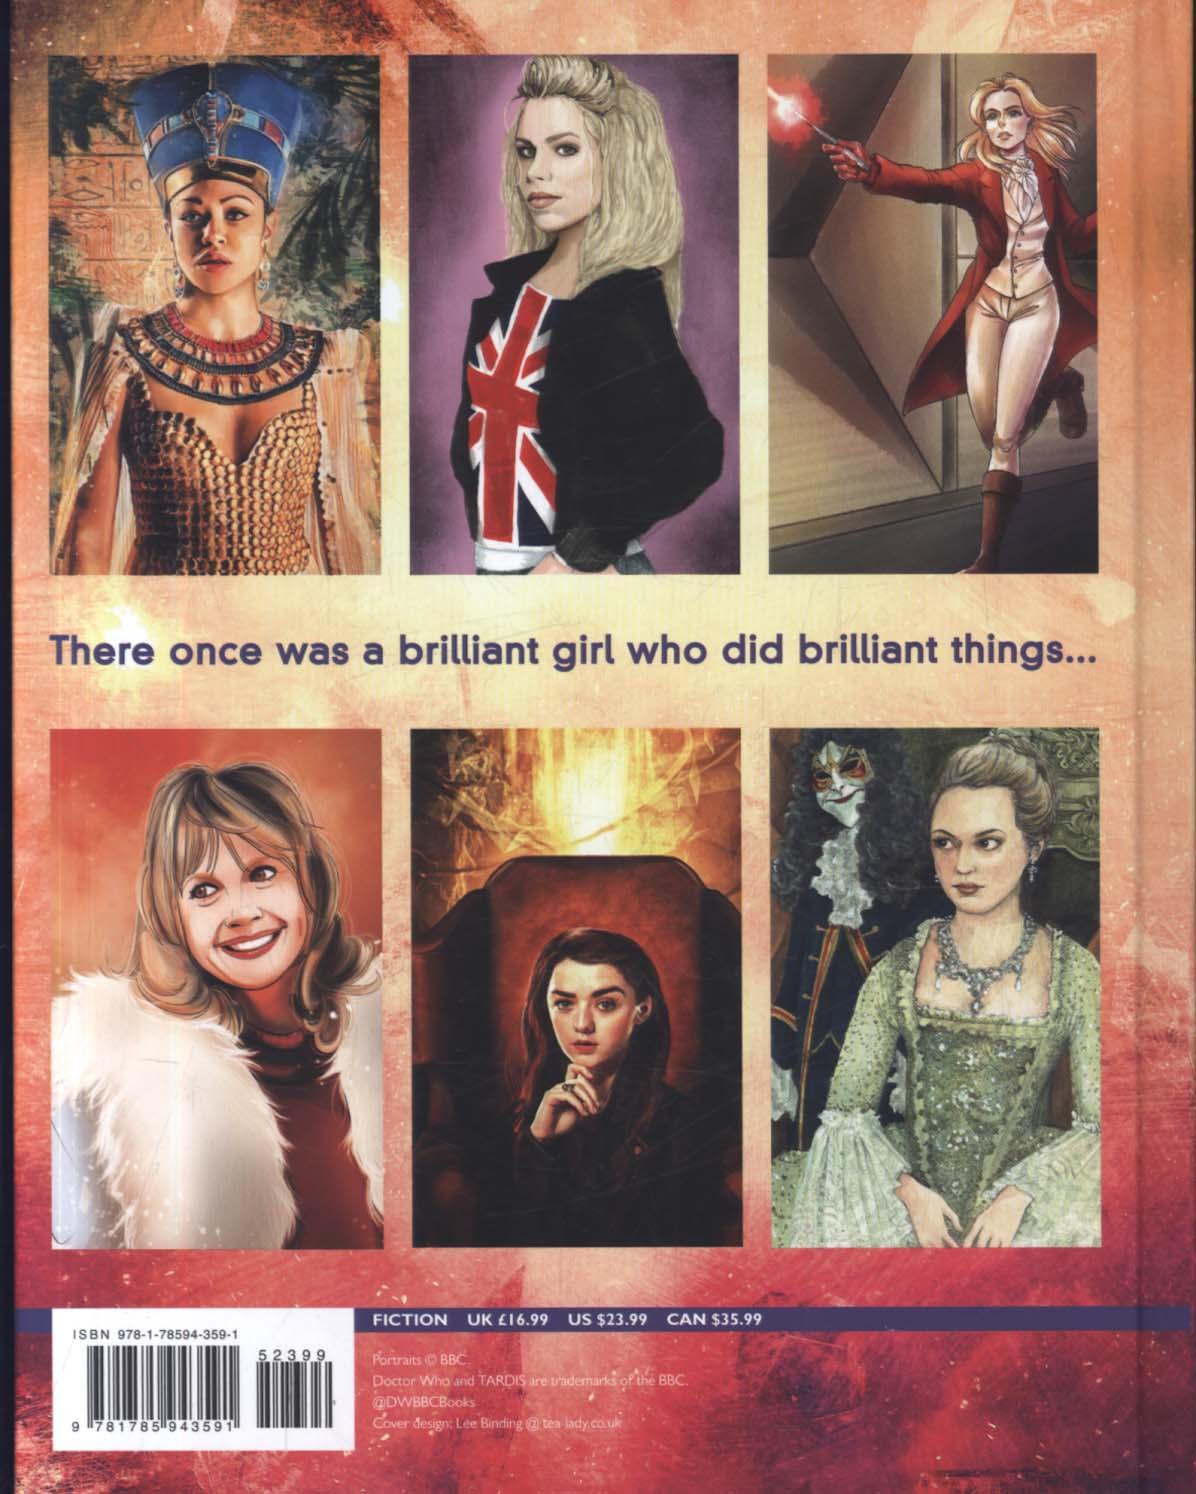 Doctor Who: The Women Who Lived